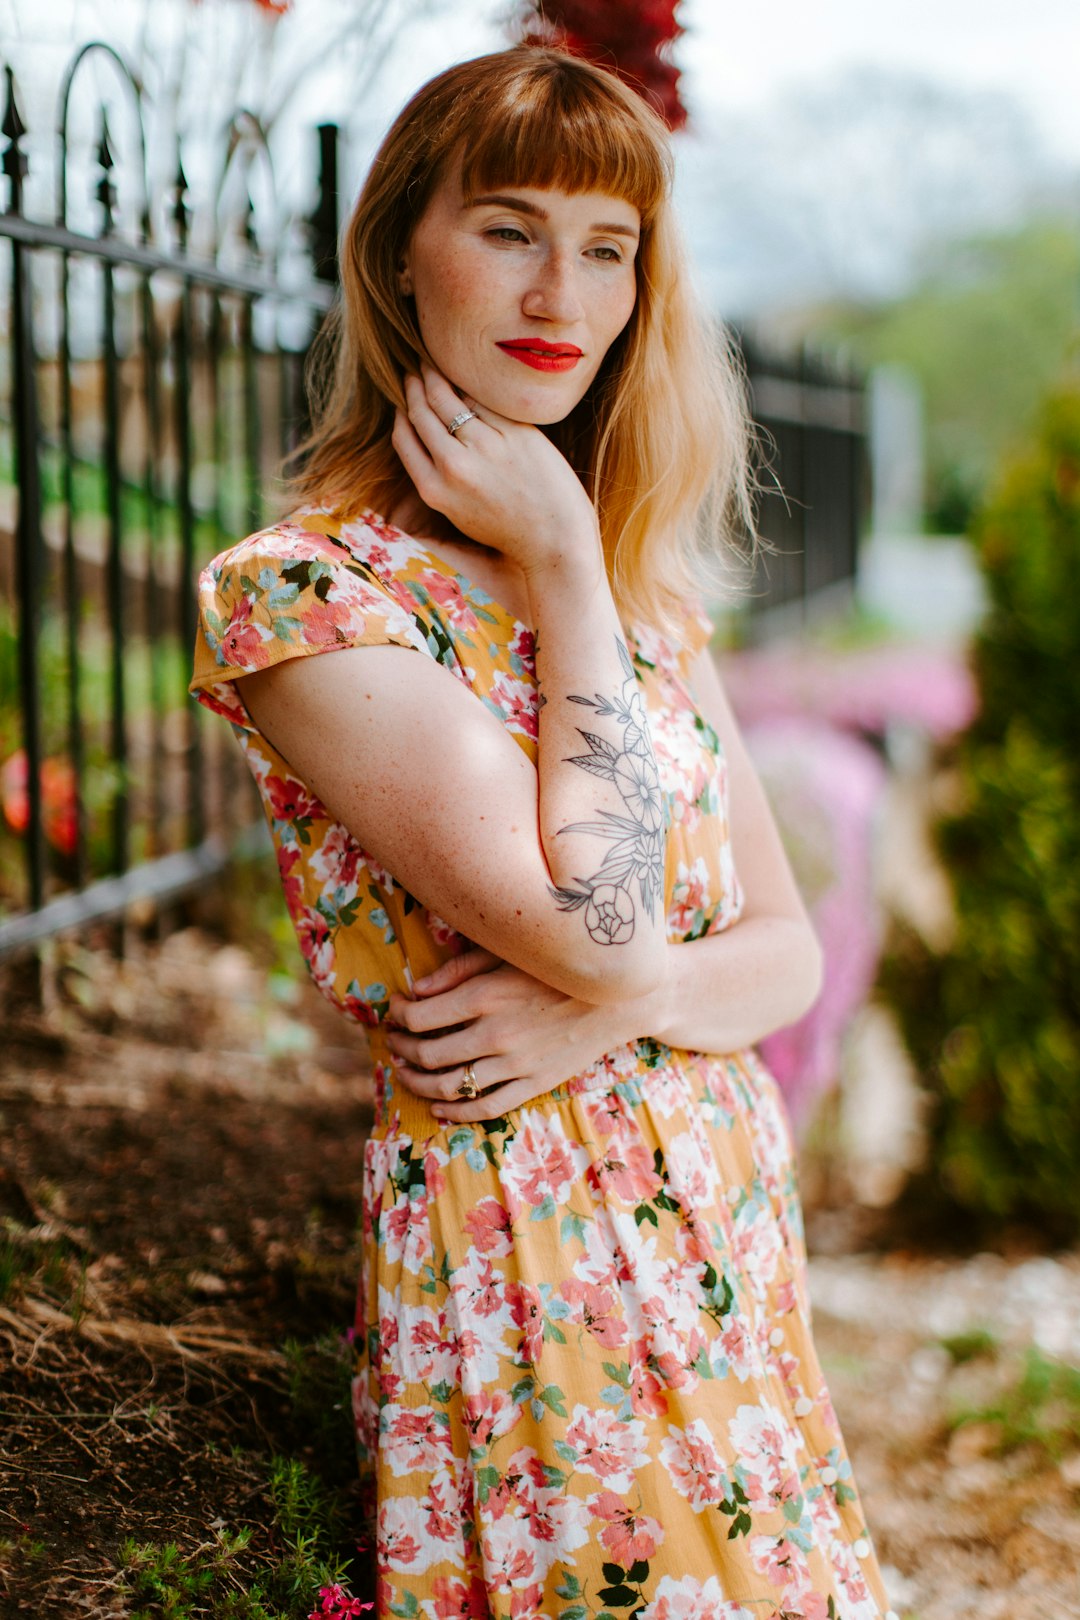 woman in orange and white floral dress standing near fence during daytime